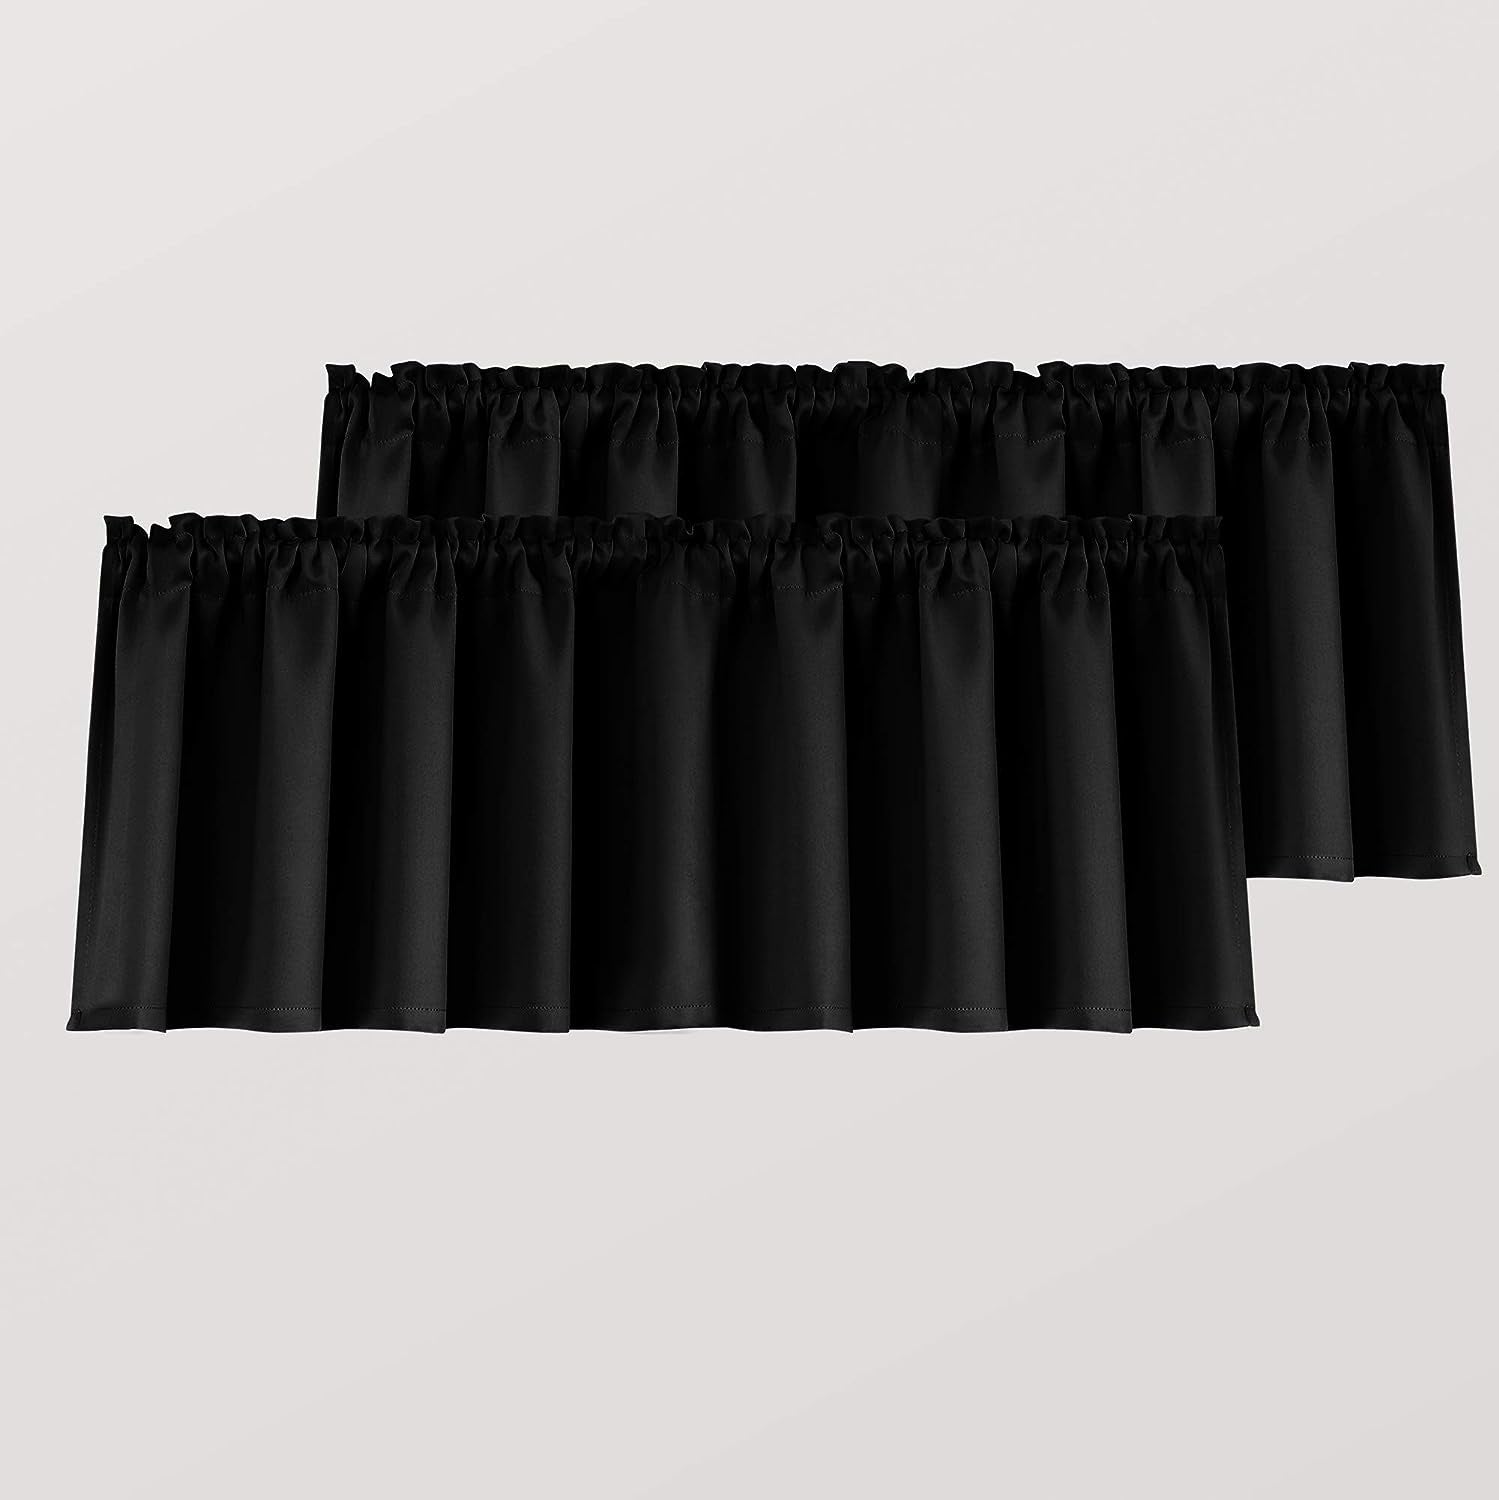 Mrs.Naturall Beige Valance Curtains for Windows 36X16 Inch Length  MRS.NATURALL TEXTILE Black 52X18 